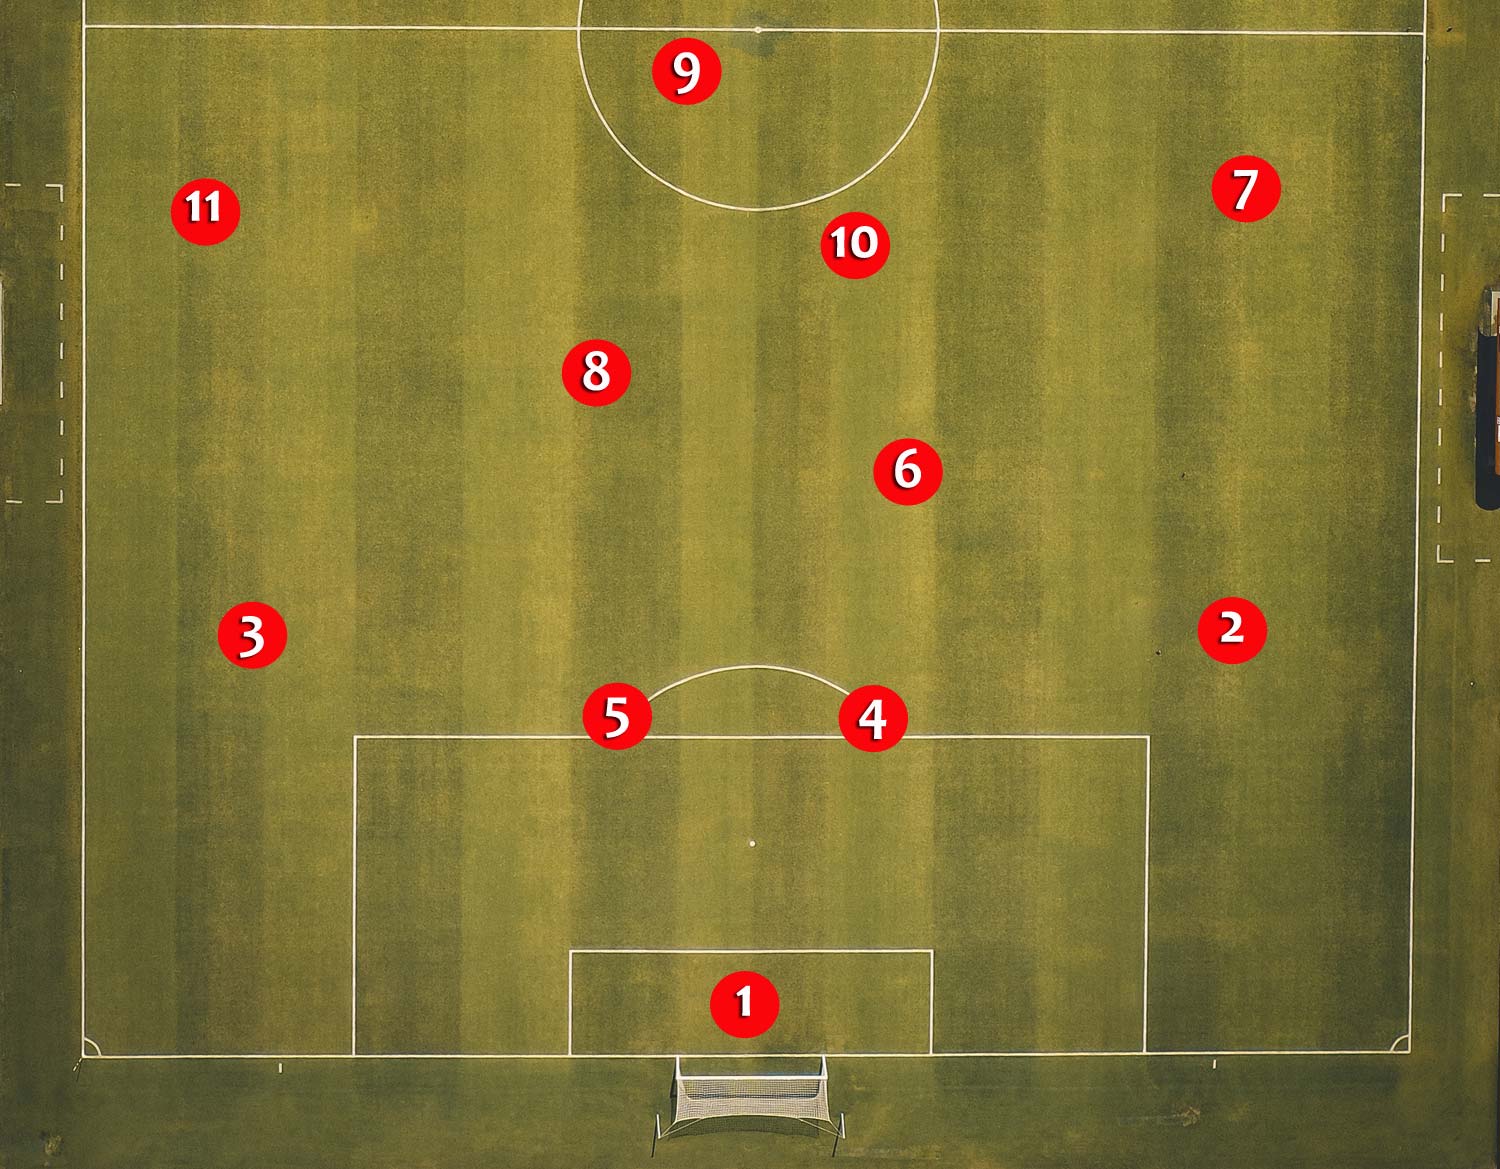 us soccer player positions by number